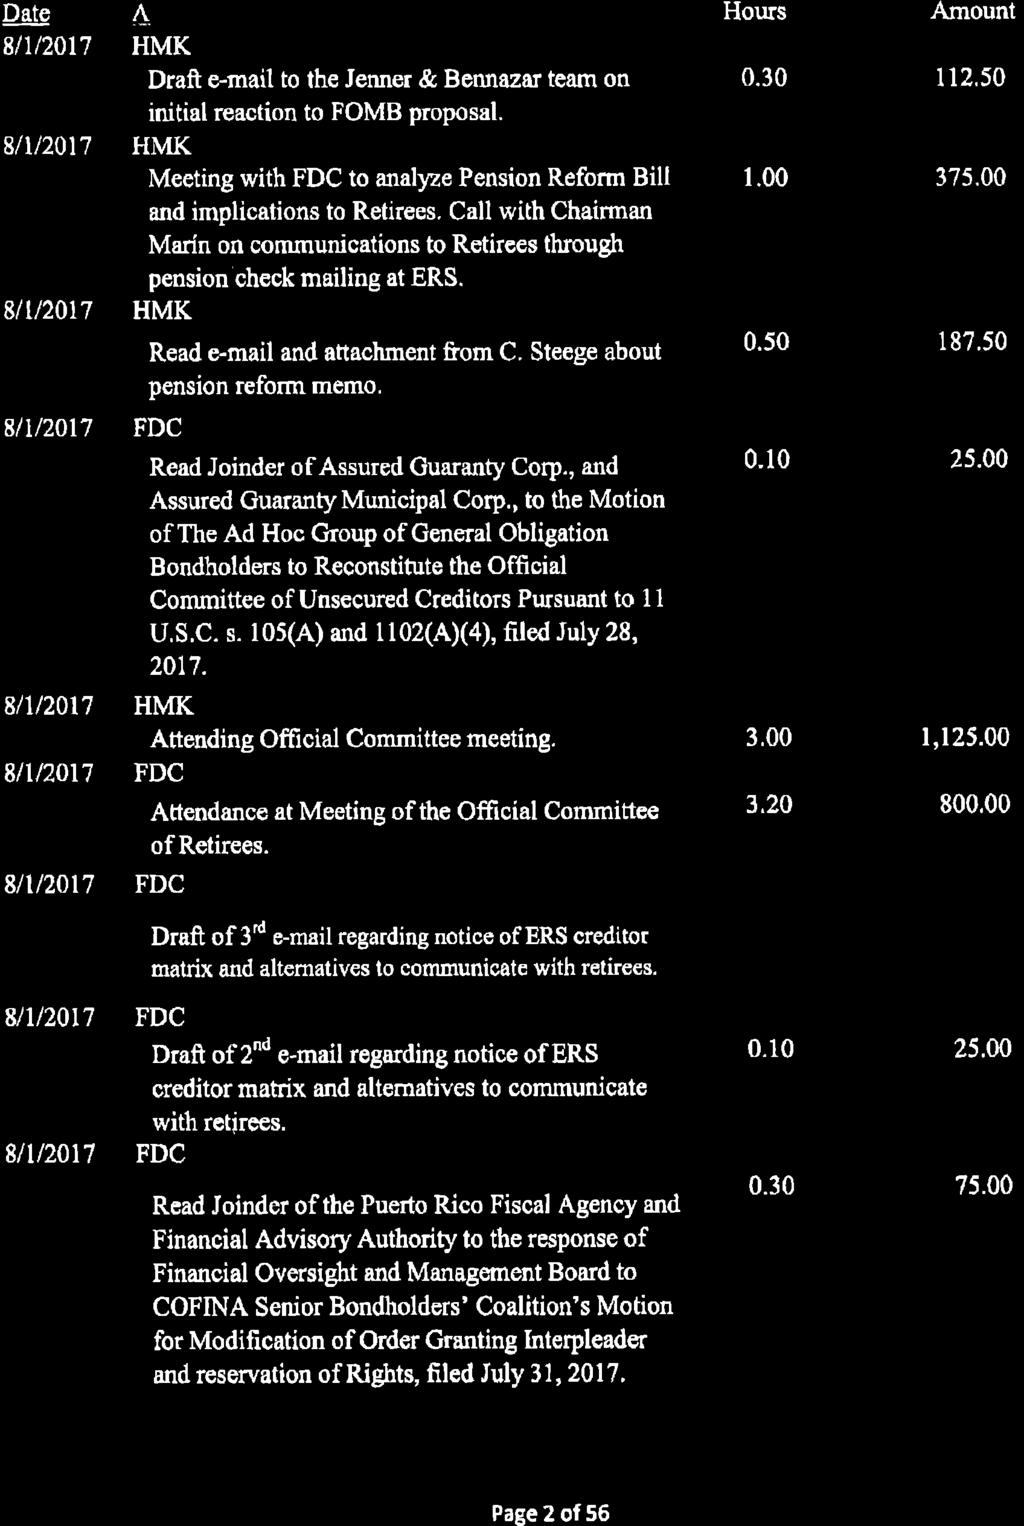 1 Exhibit C- Detailed Time Records Page 15 of 112 Date 8/1/2017 8/1/2017 8/1/2017 8/1/2017 8/1/2017 8/1/2017 8/1/2017 8/1/2017 8/1/2017 Attorney / Activity HMK Draft e-mail to the Jenner & Bennazar